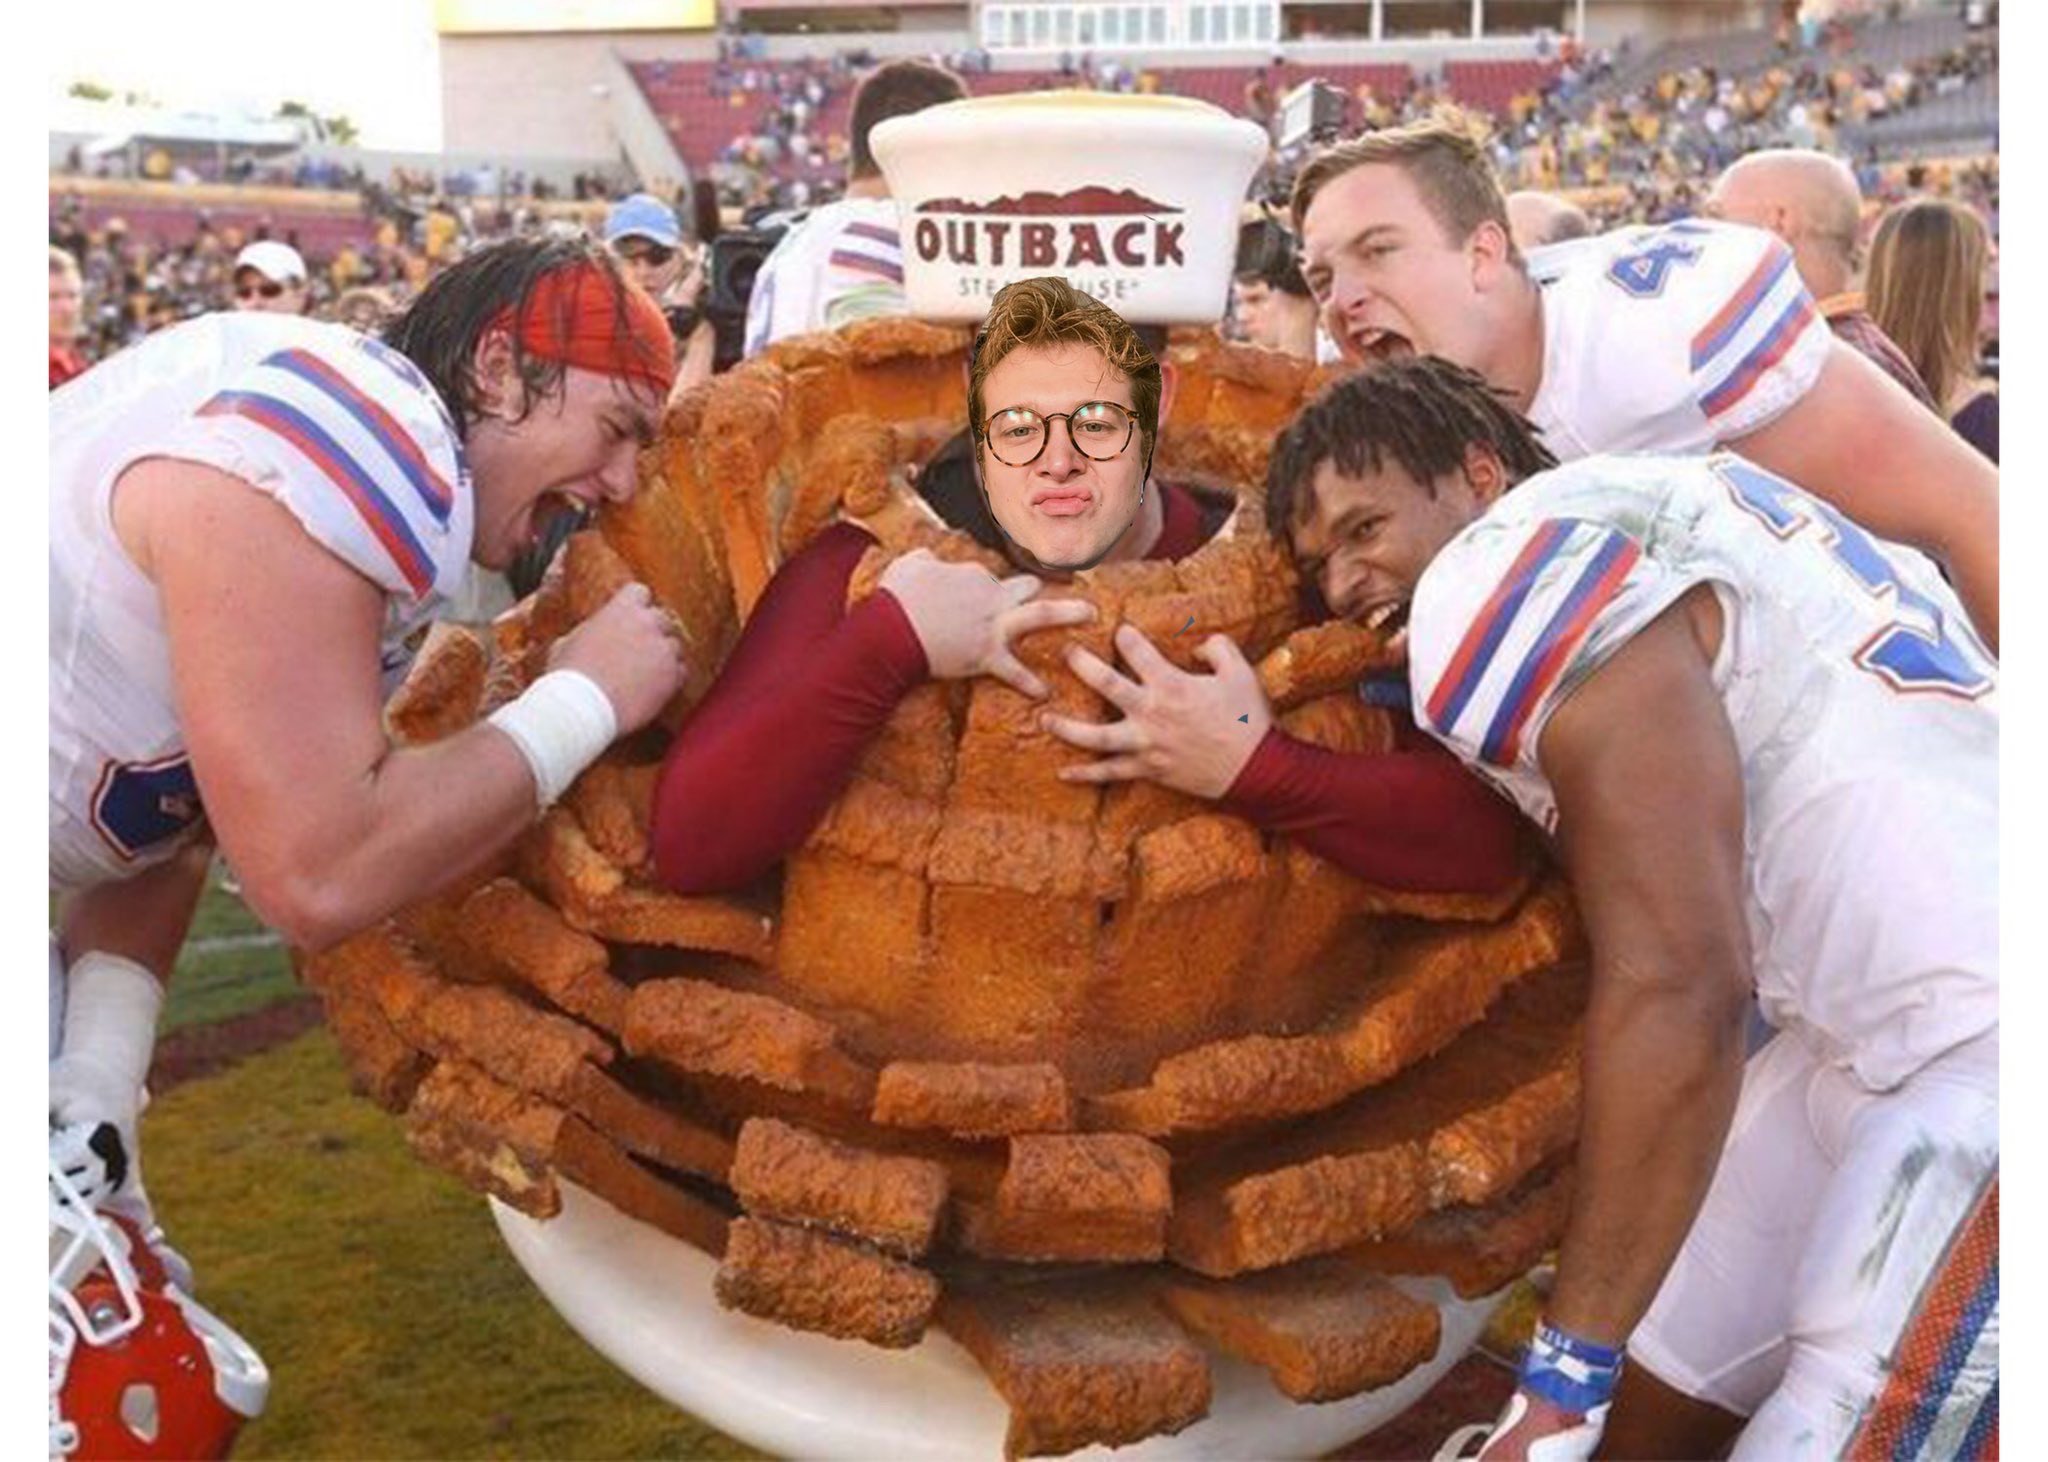 College senior to play Bloomin’ Onion mascot at 2020 Outback Bowl